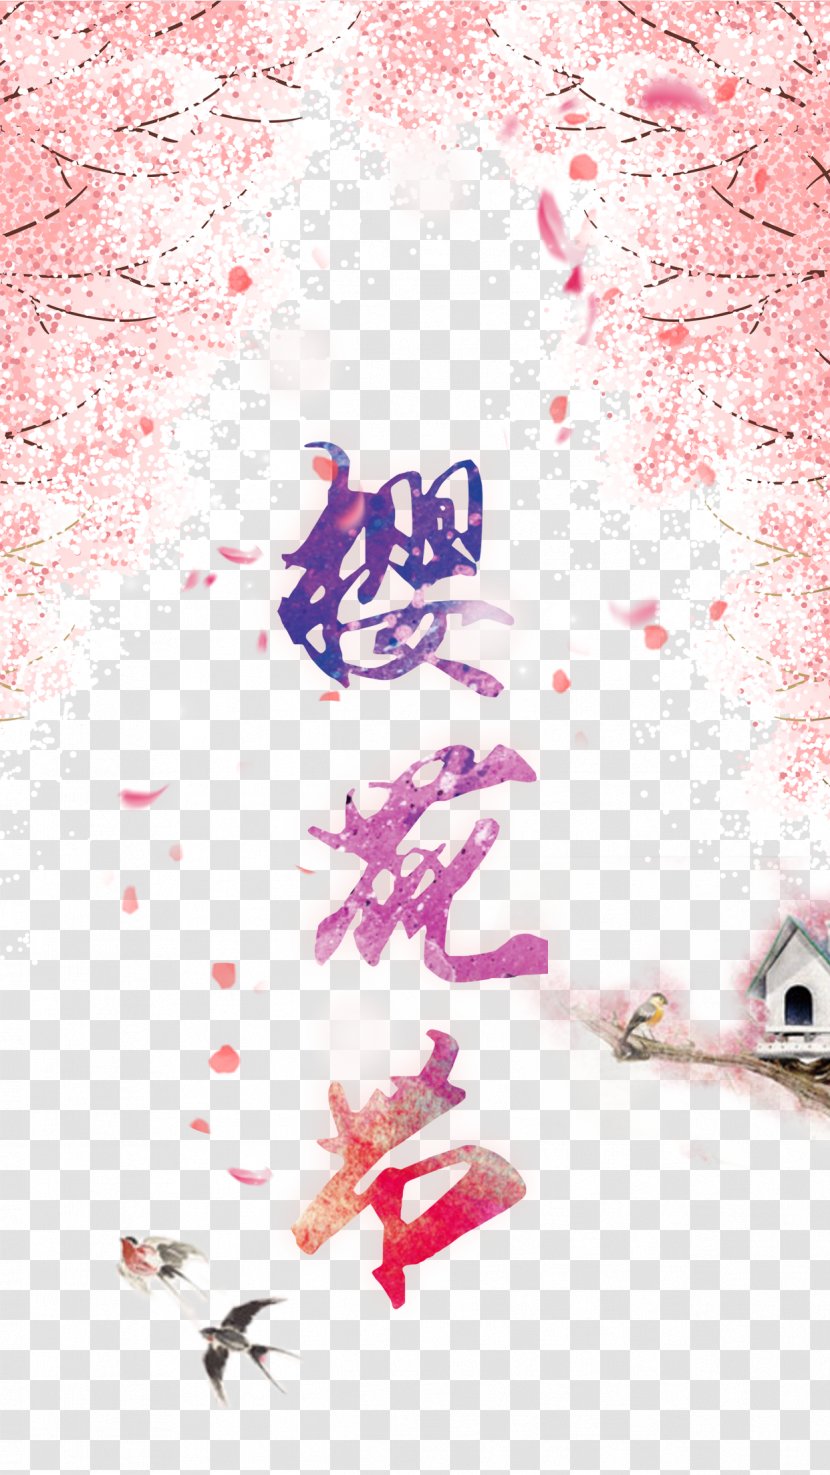 National Cherry Blossom Festival Graphic Design - Poster - Colorful Transparent PNG